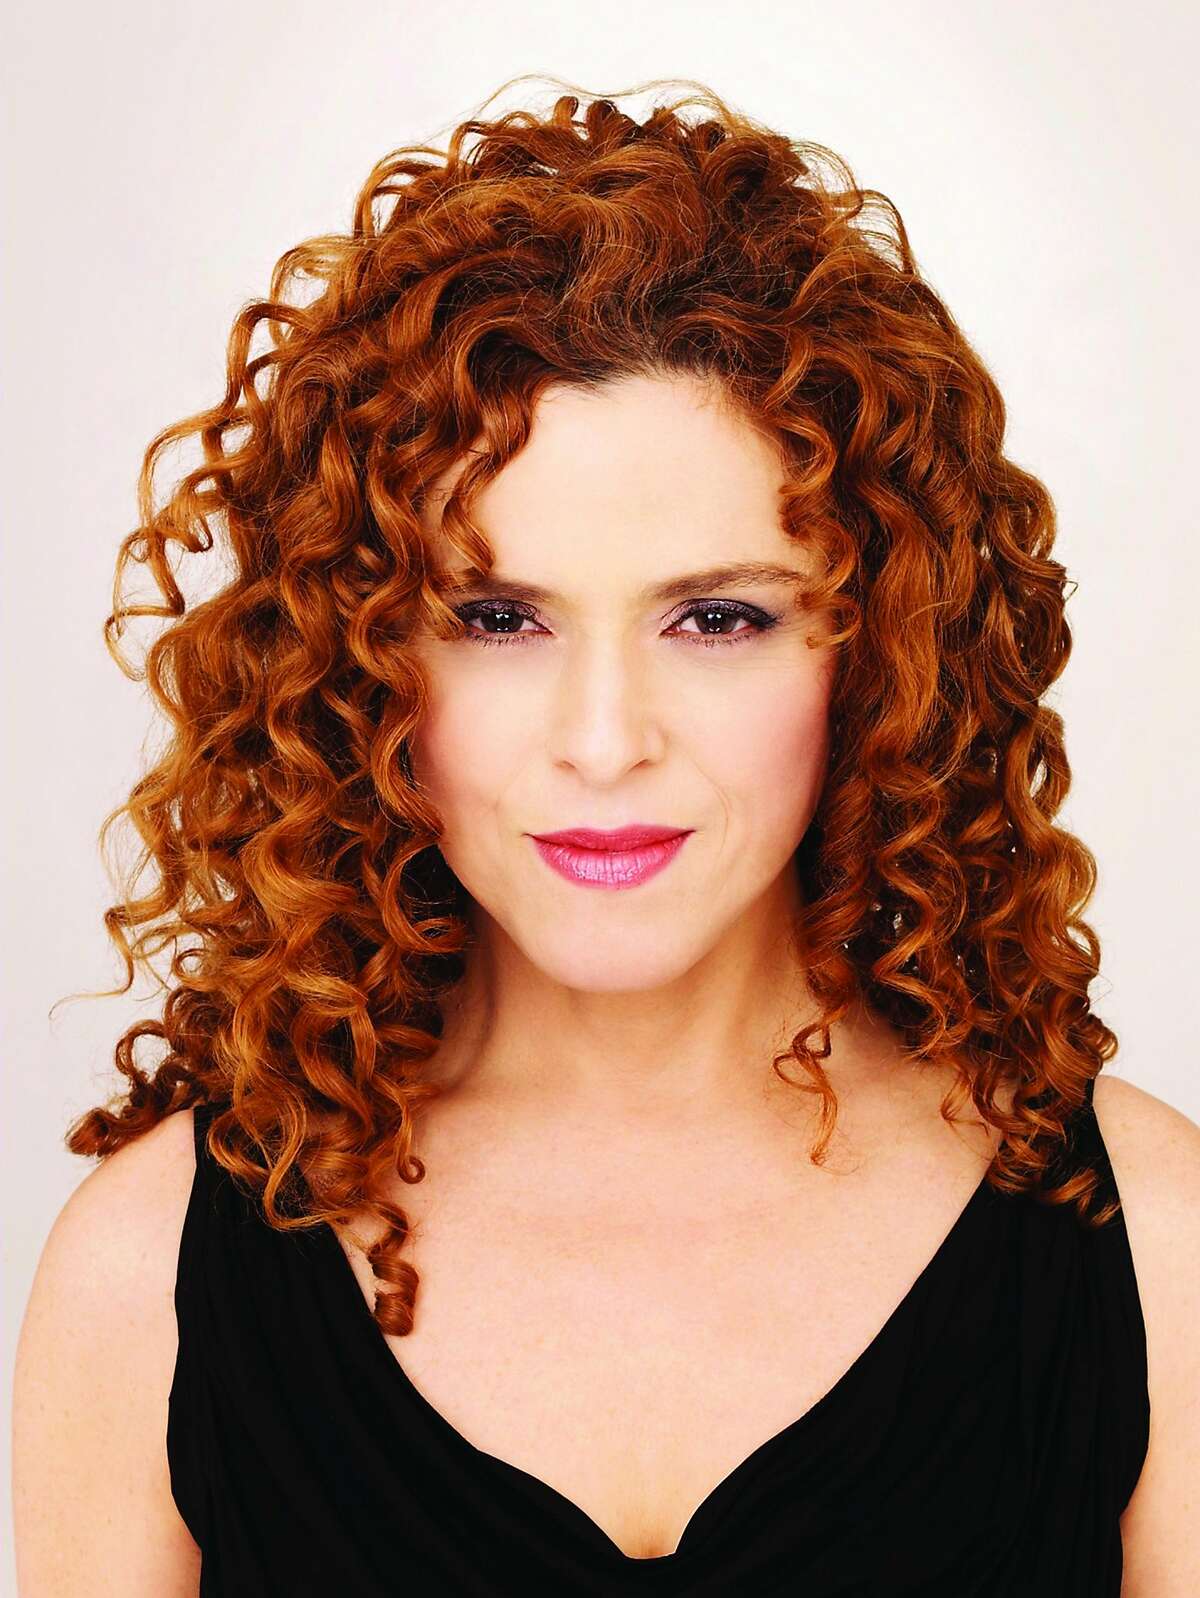 Bernadette Peters plays the Palace (of Fine Arts)